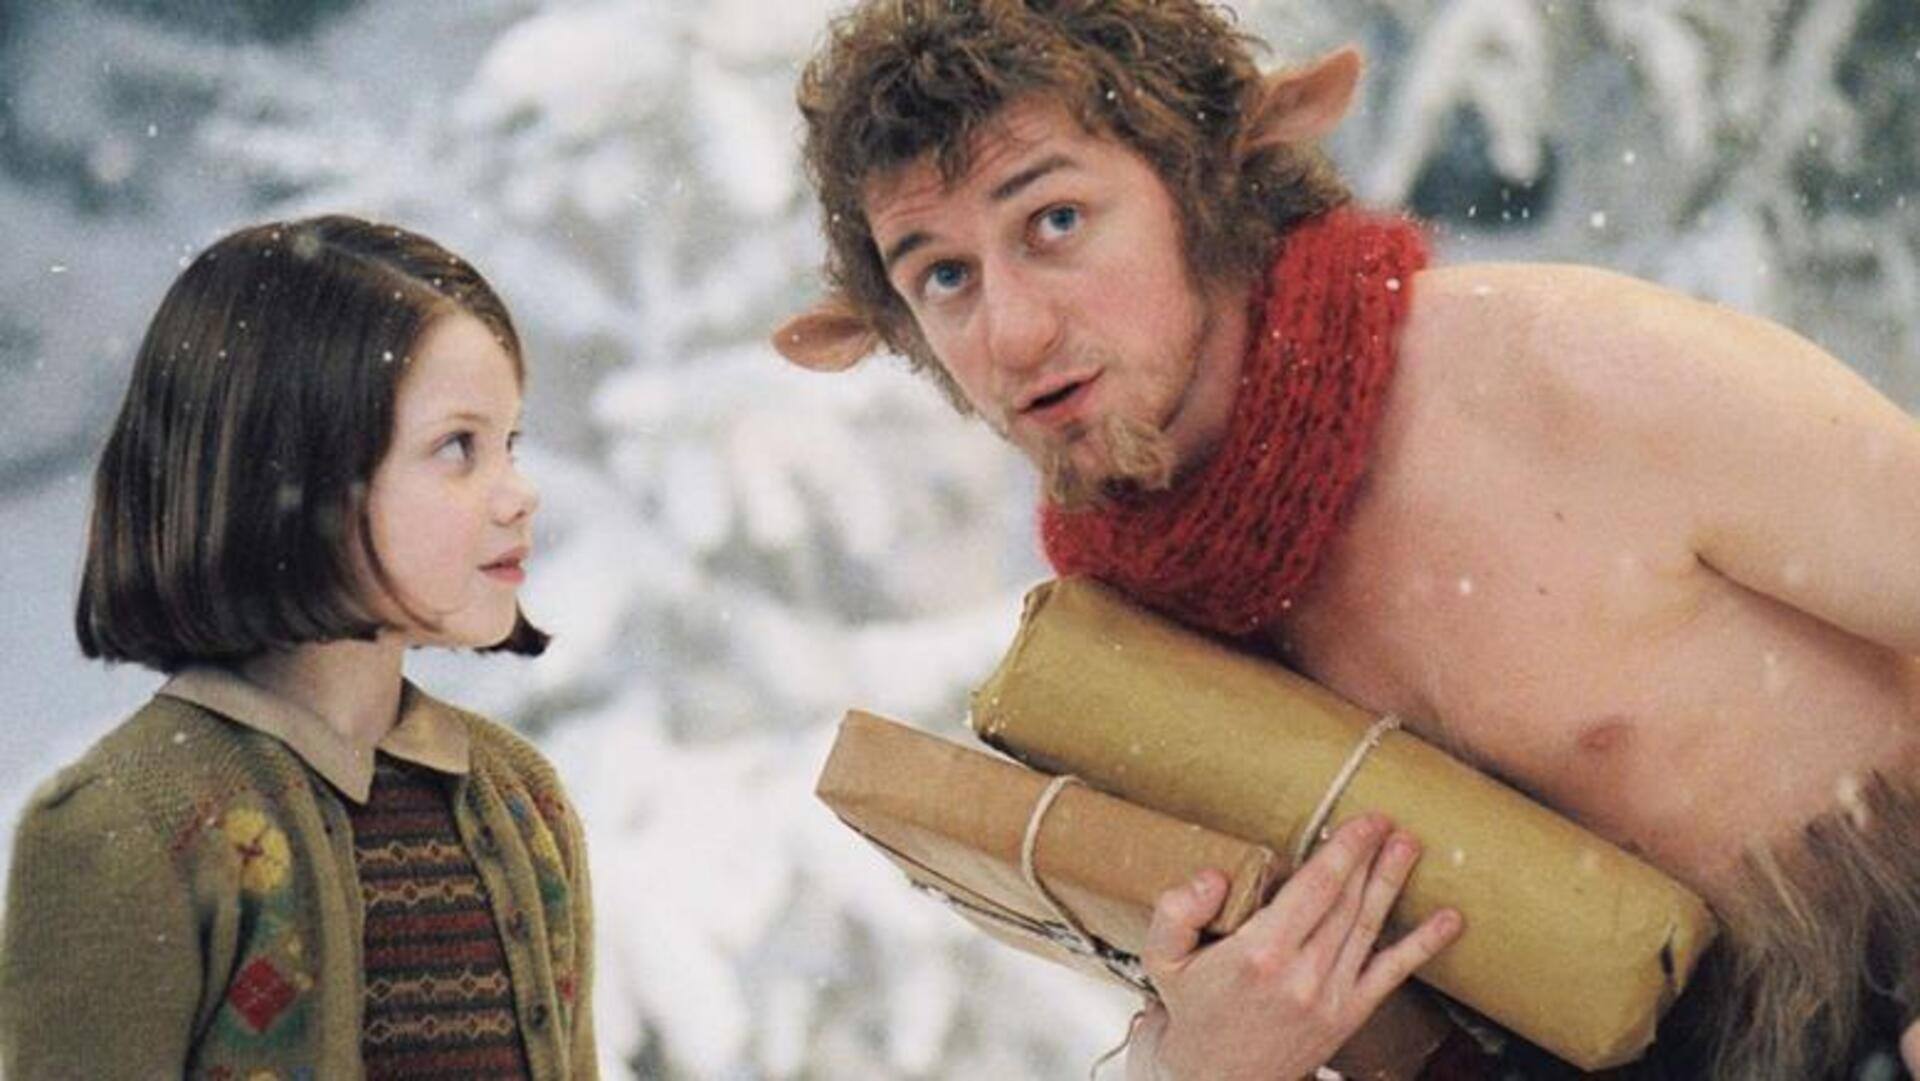 How to watch 'The Chronicles of Narnia' in chronological order